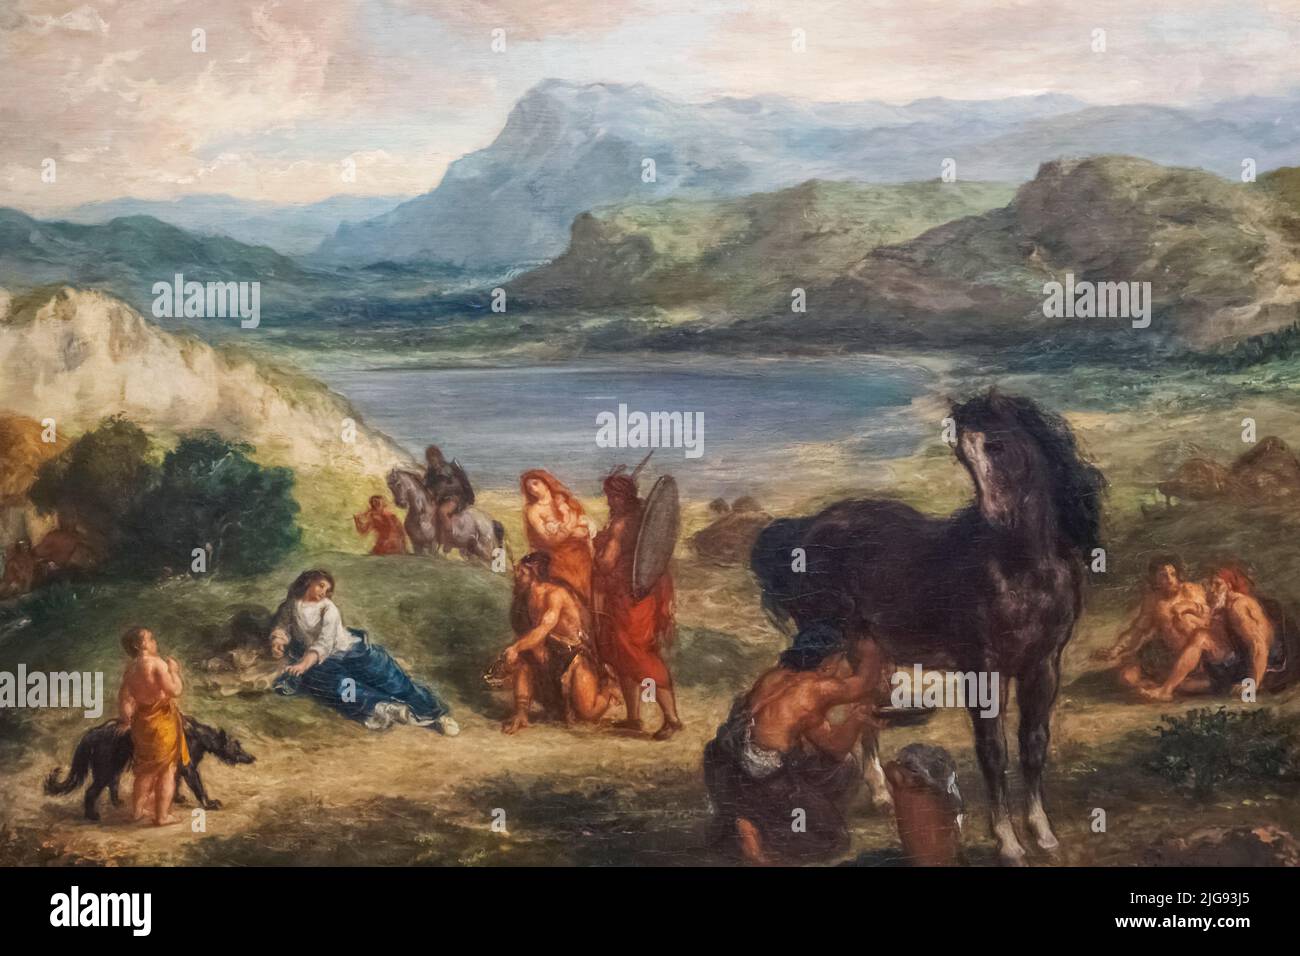 Painting titled 'Ovid among the Scythians' by French Artist Eugene Delacroix dated 1859 Stock Photo